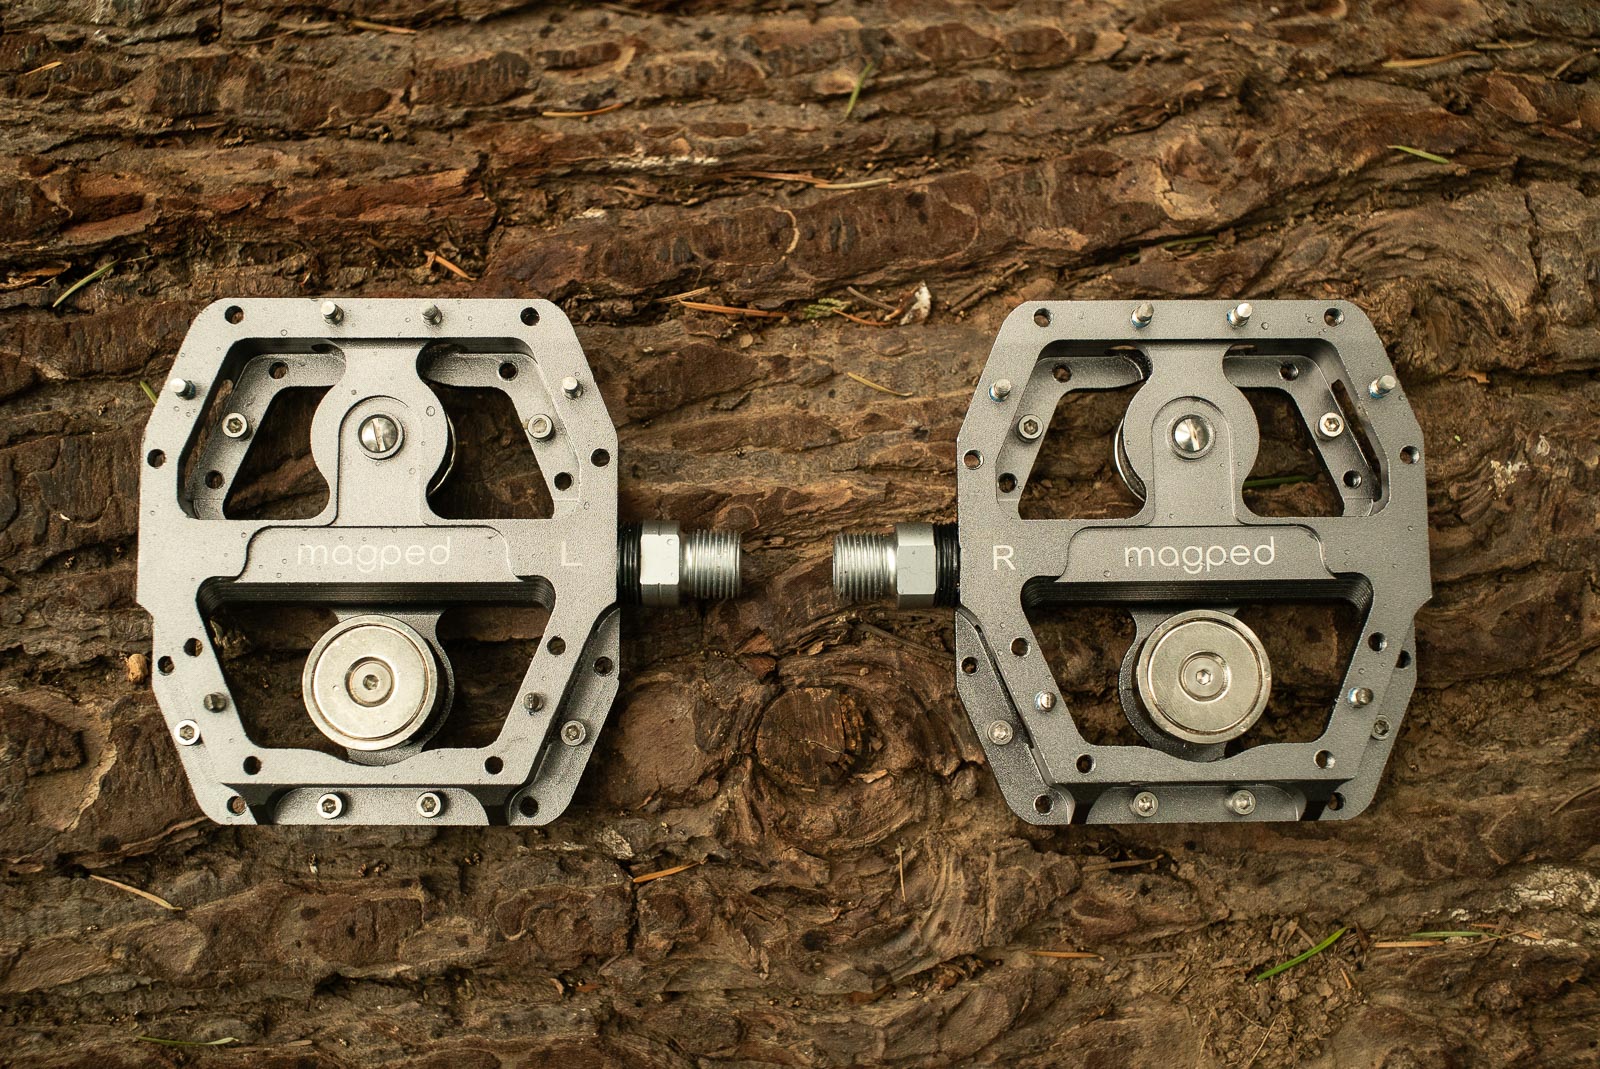 enduro clipless pedals